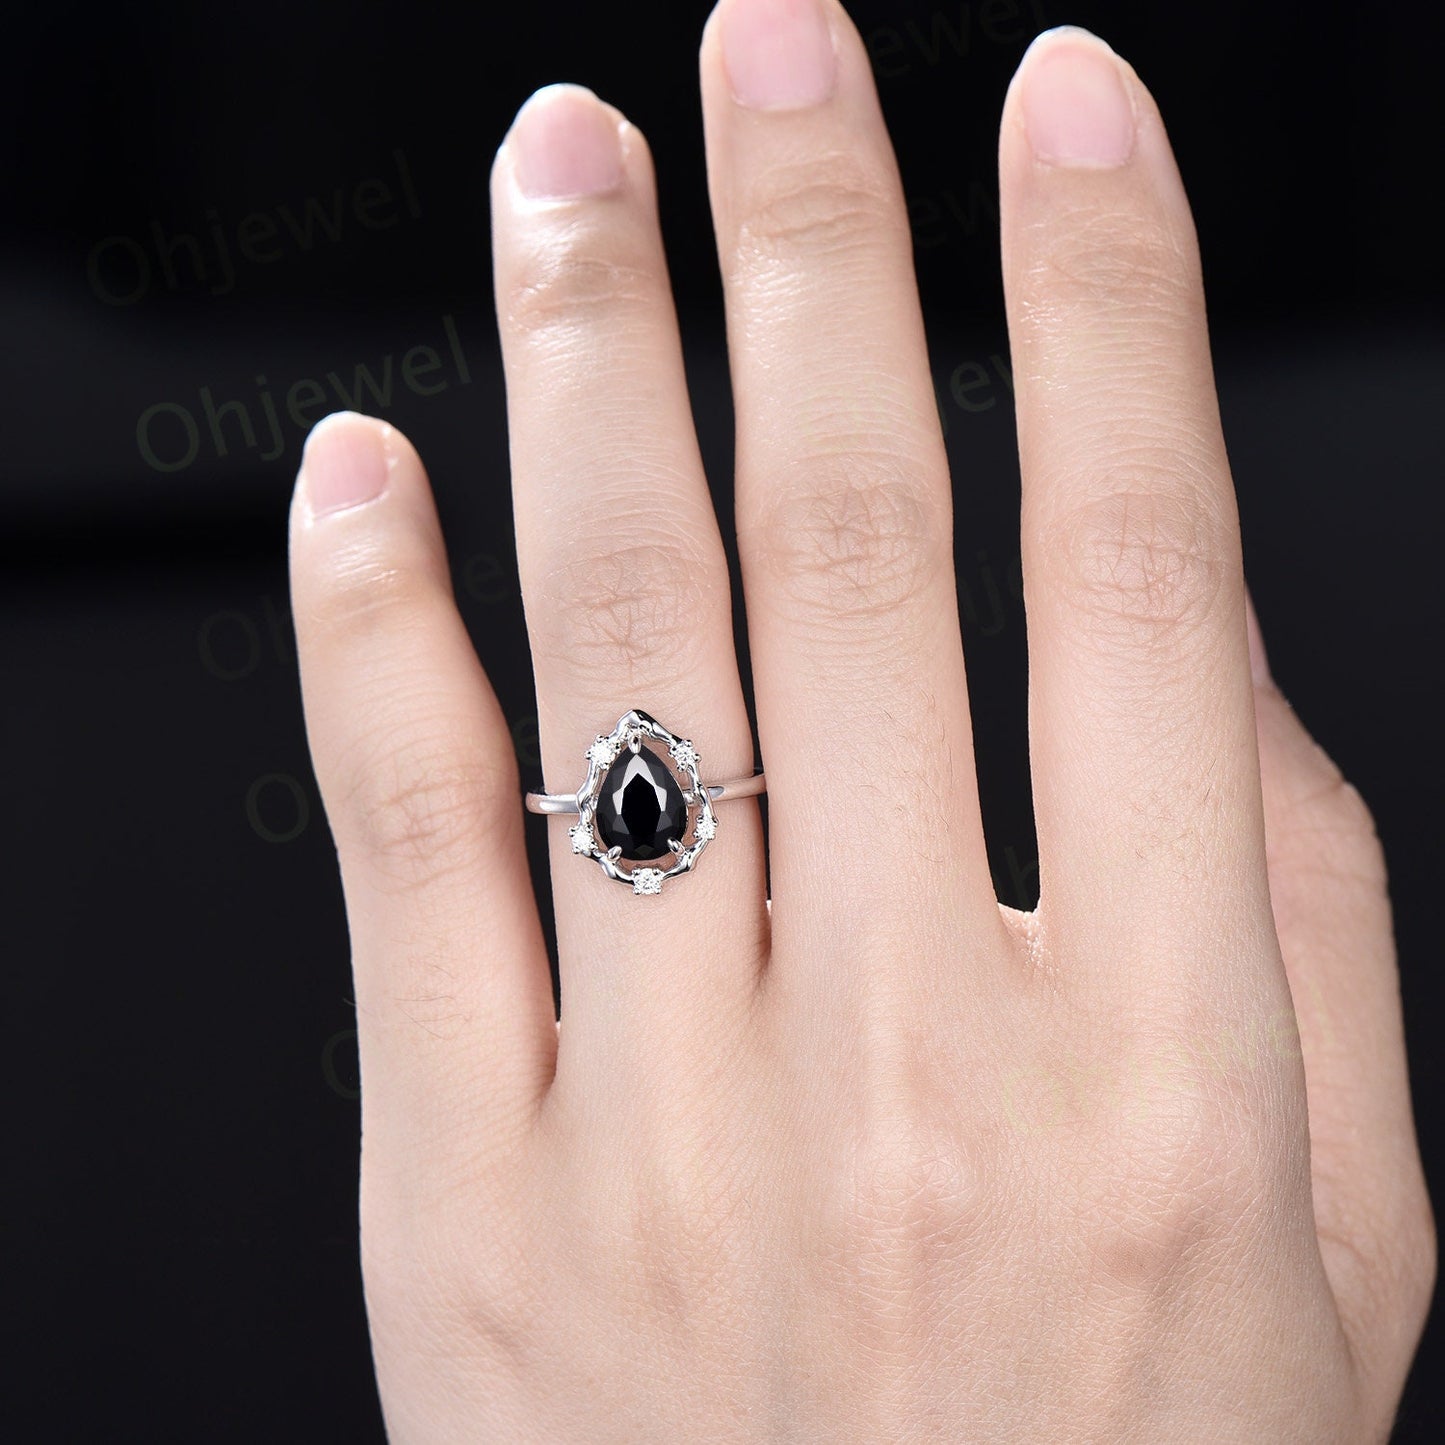 Vintage pear black onyx engagement ring leaf Nature inspired halo cluster diamond ring women 14k white gold branch anniversary ring gift